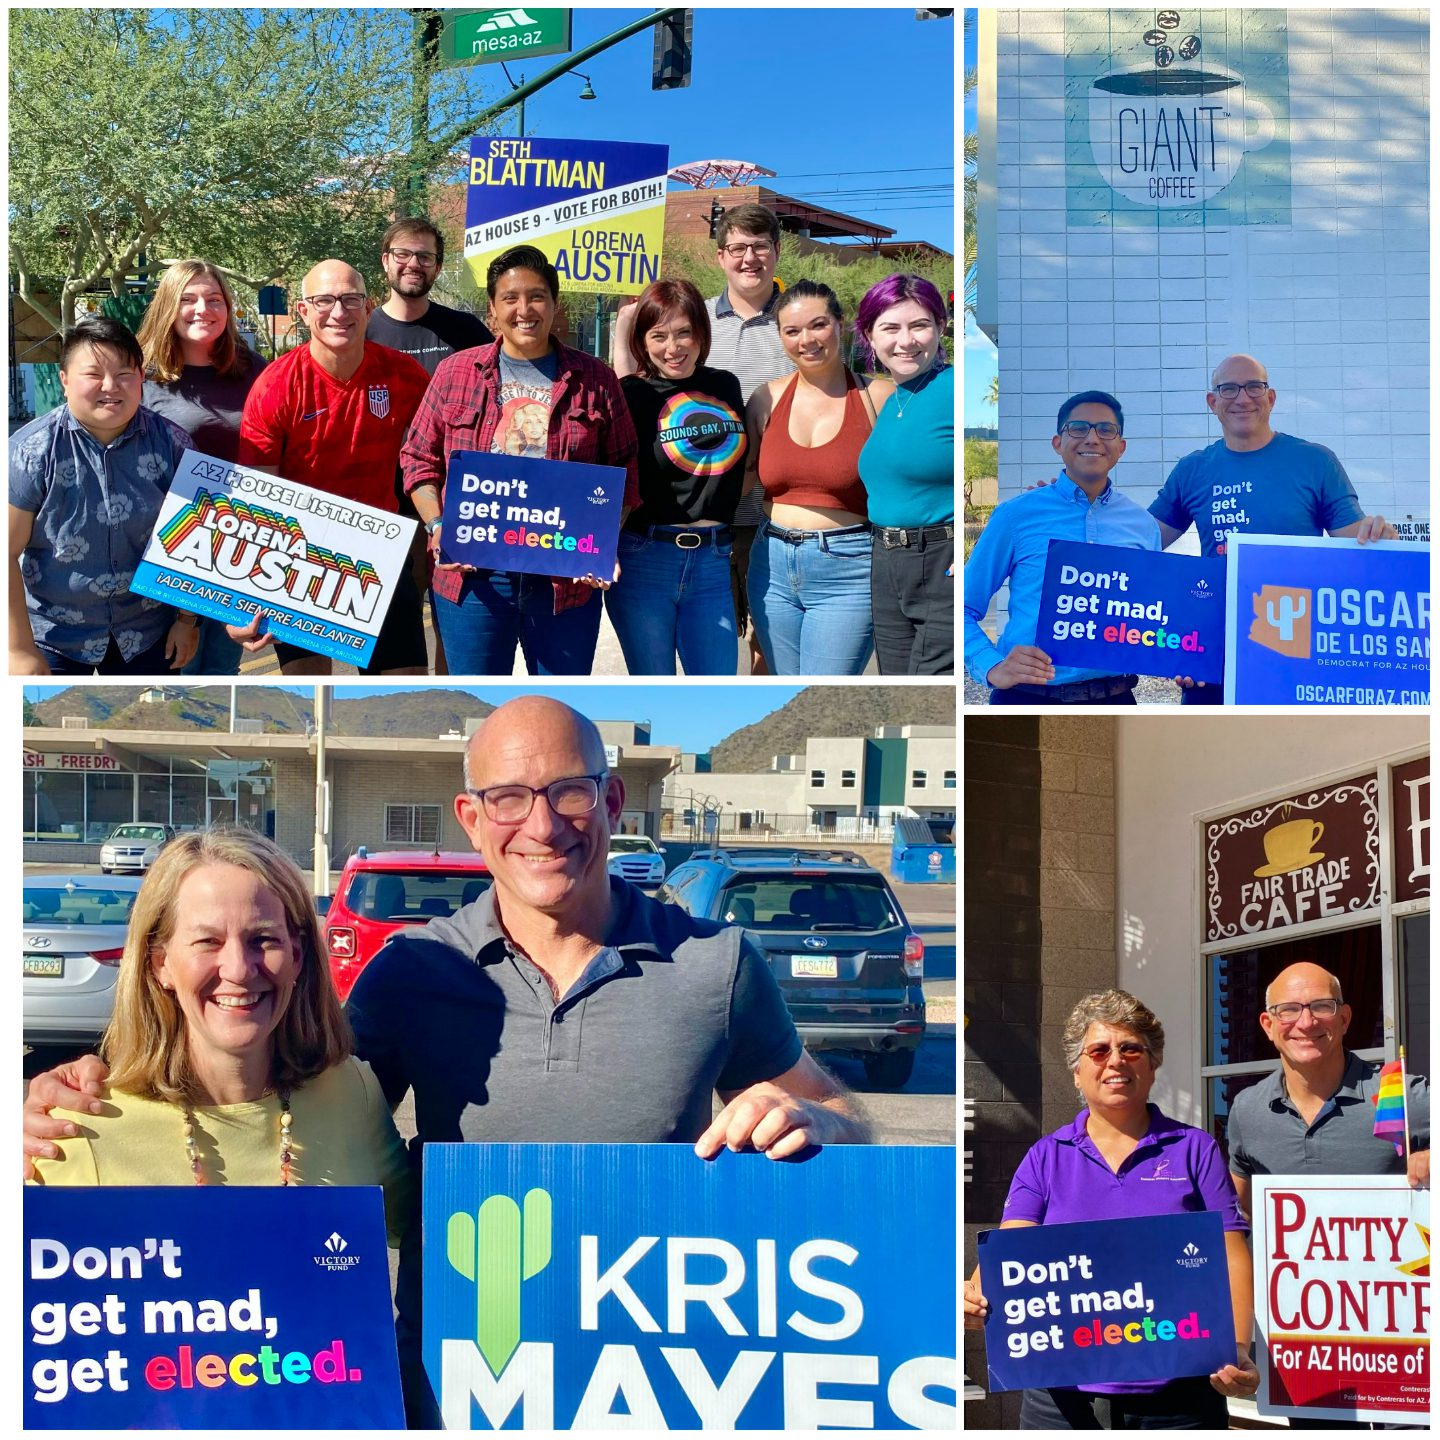 Top right to left: Marty with Lorena Austin(center) and team, Marty with Oscar De Los Santos. Bottom: Marty with Kris Mayes, Marty with Patty Contreras.